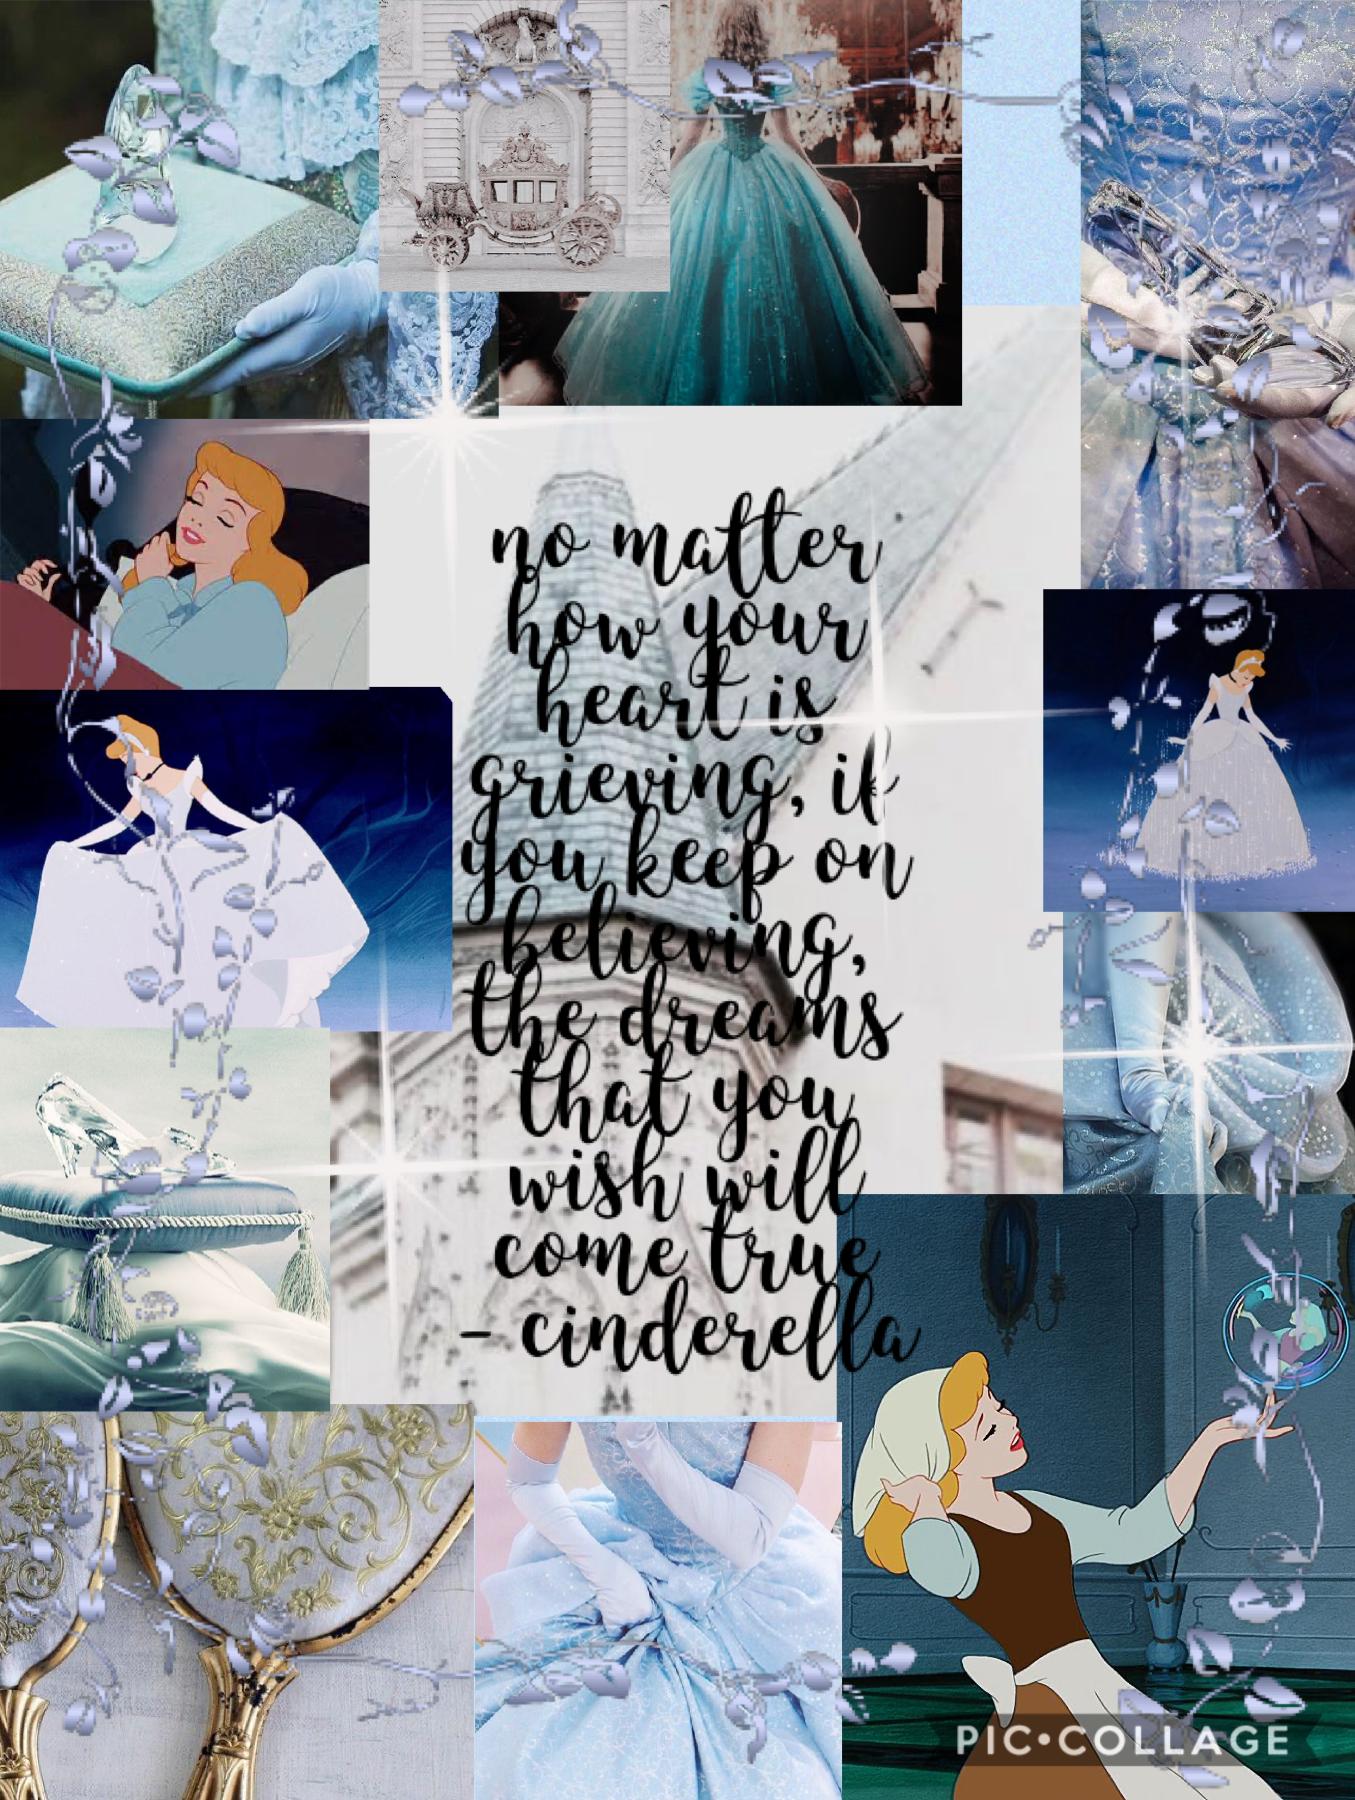 cinderella 💙💙


and advice or tips for my collages would be very much appreciated! 